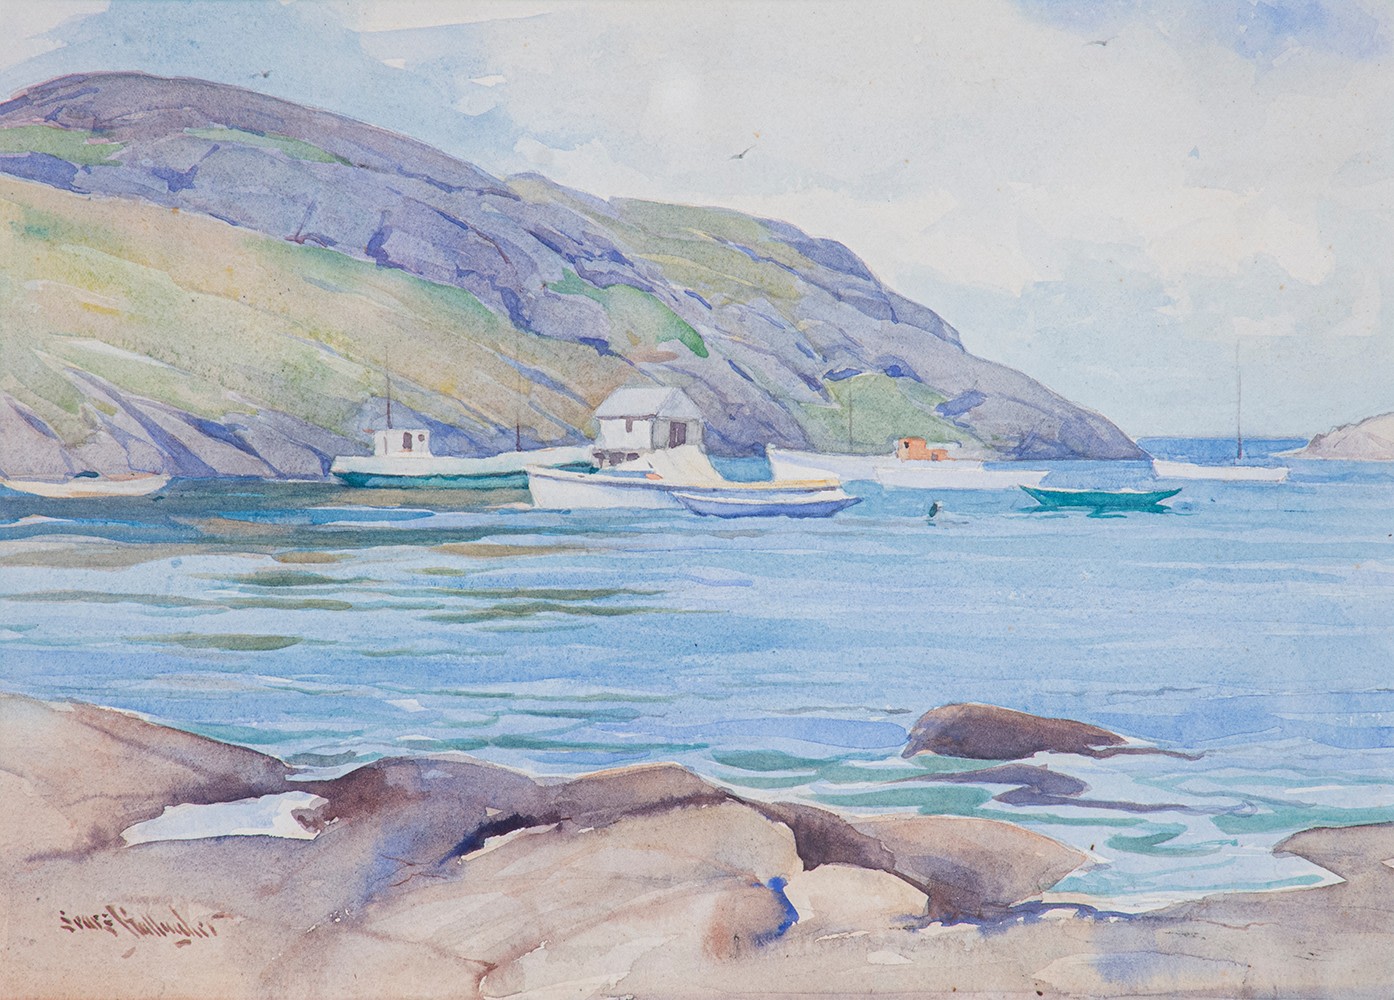 a watercolor painting depicting a small fishing shack and several boats in the water, the foreground with a rocky coastline, the background mountainous cliffs of the coast of Monhegan island in Maine